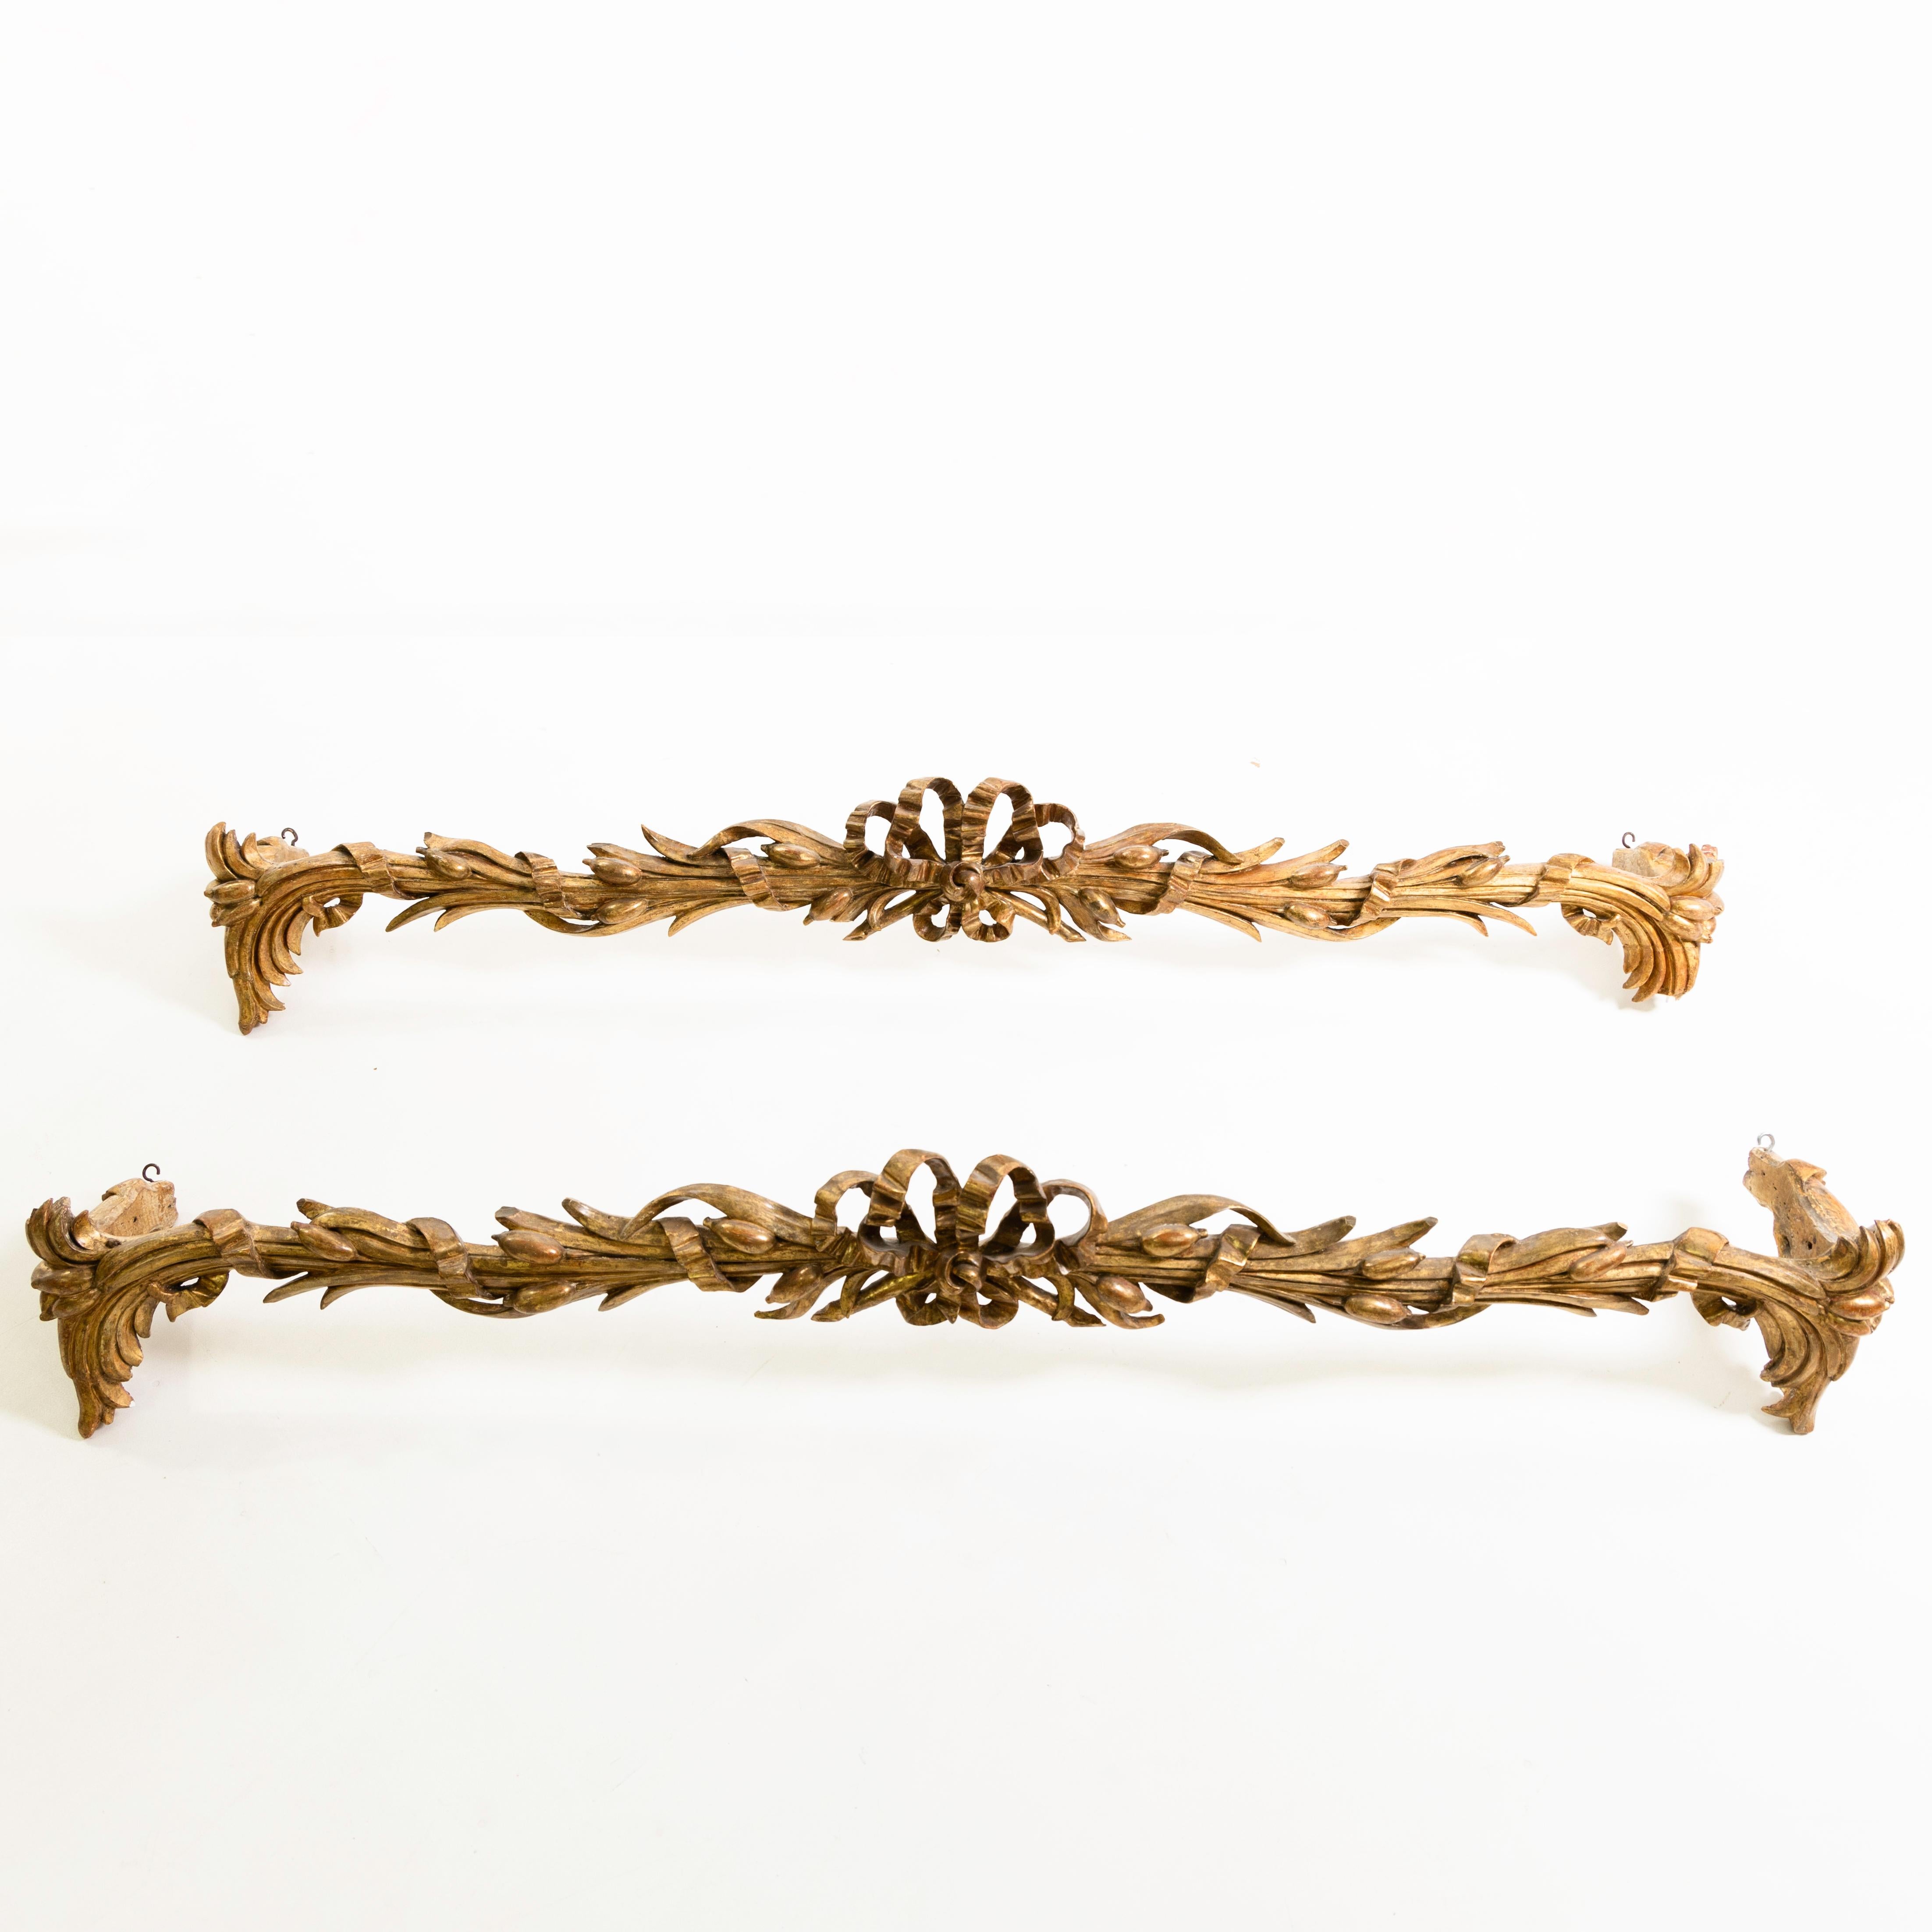 Pair of gold patinated Italian curtain rods with bows and leaf decoration.